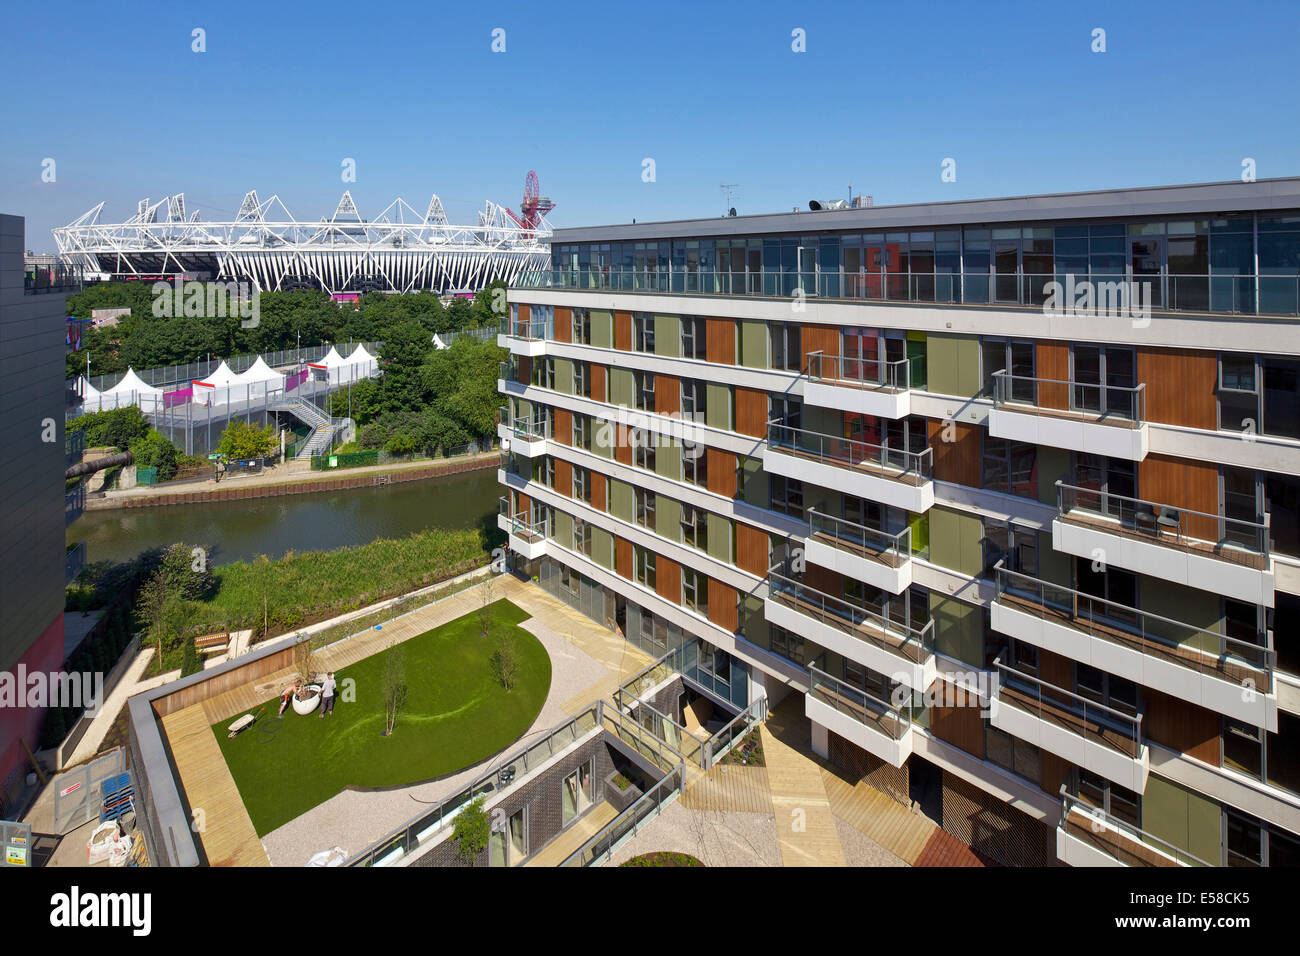 Balconies and courtyard garden of 419 Wick Lane London. New apartments built by Development securities Plc opposite the new Stock Photo